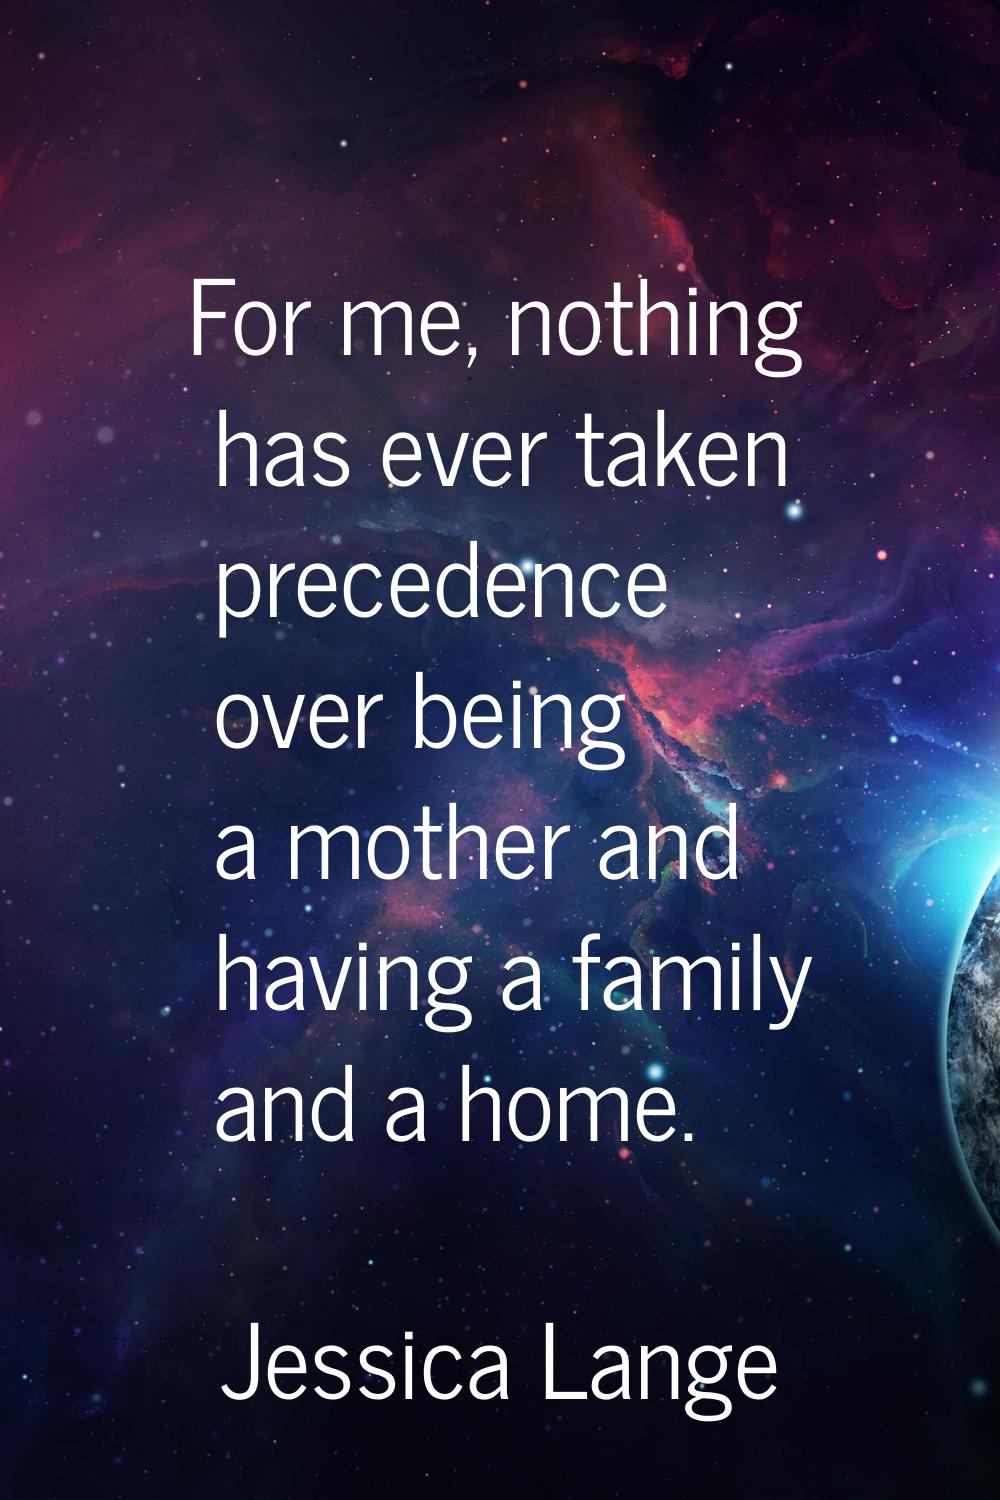 For me, nothing has ever taken precedence over being a mother and having a family and a home.